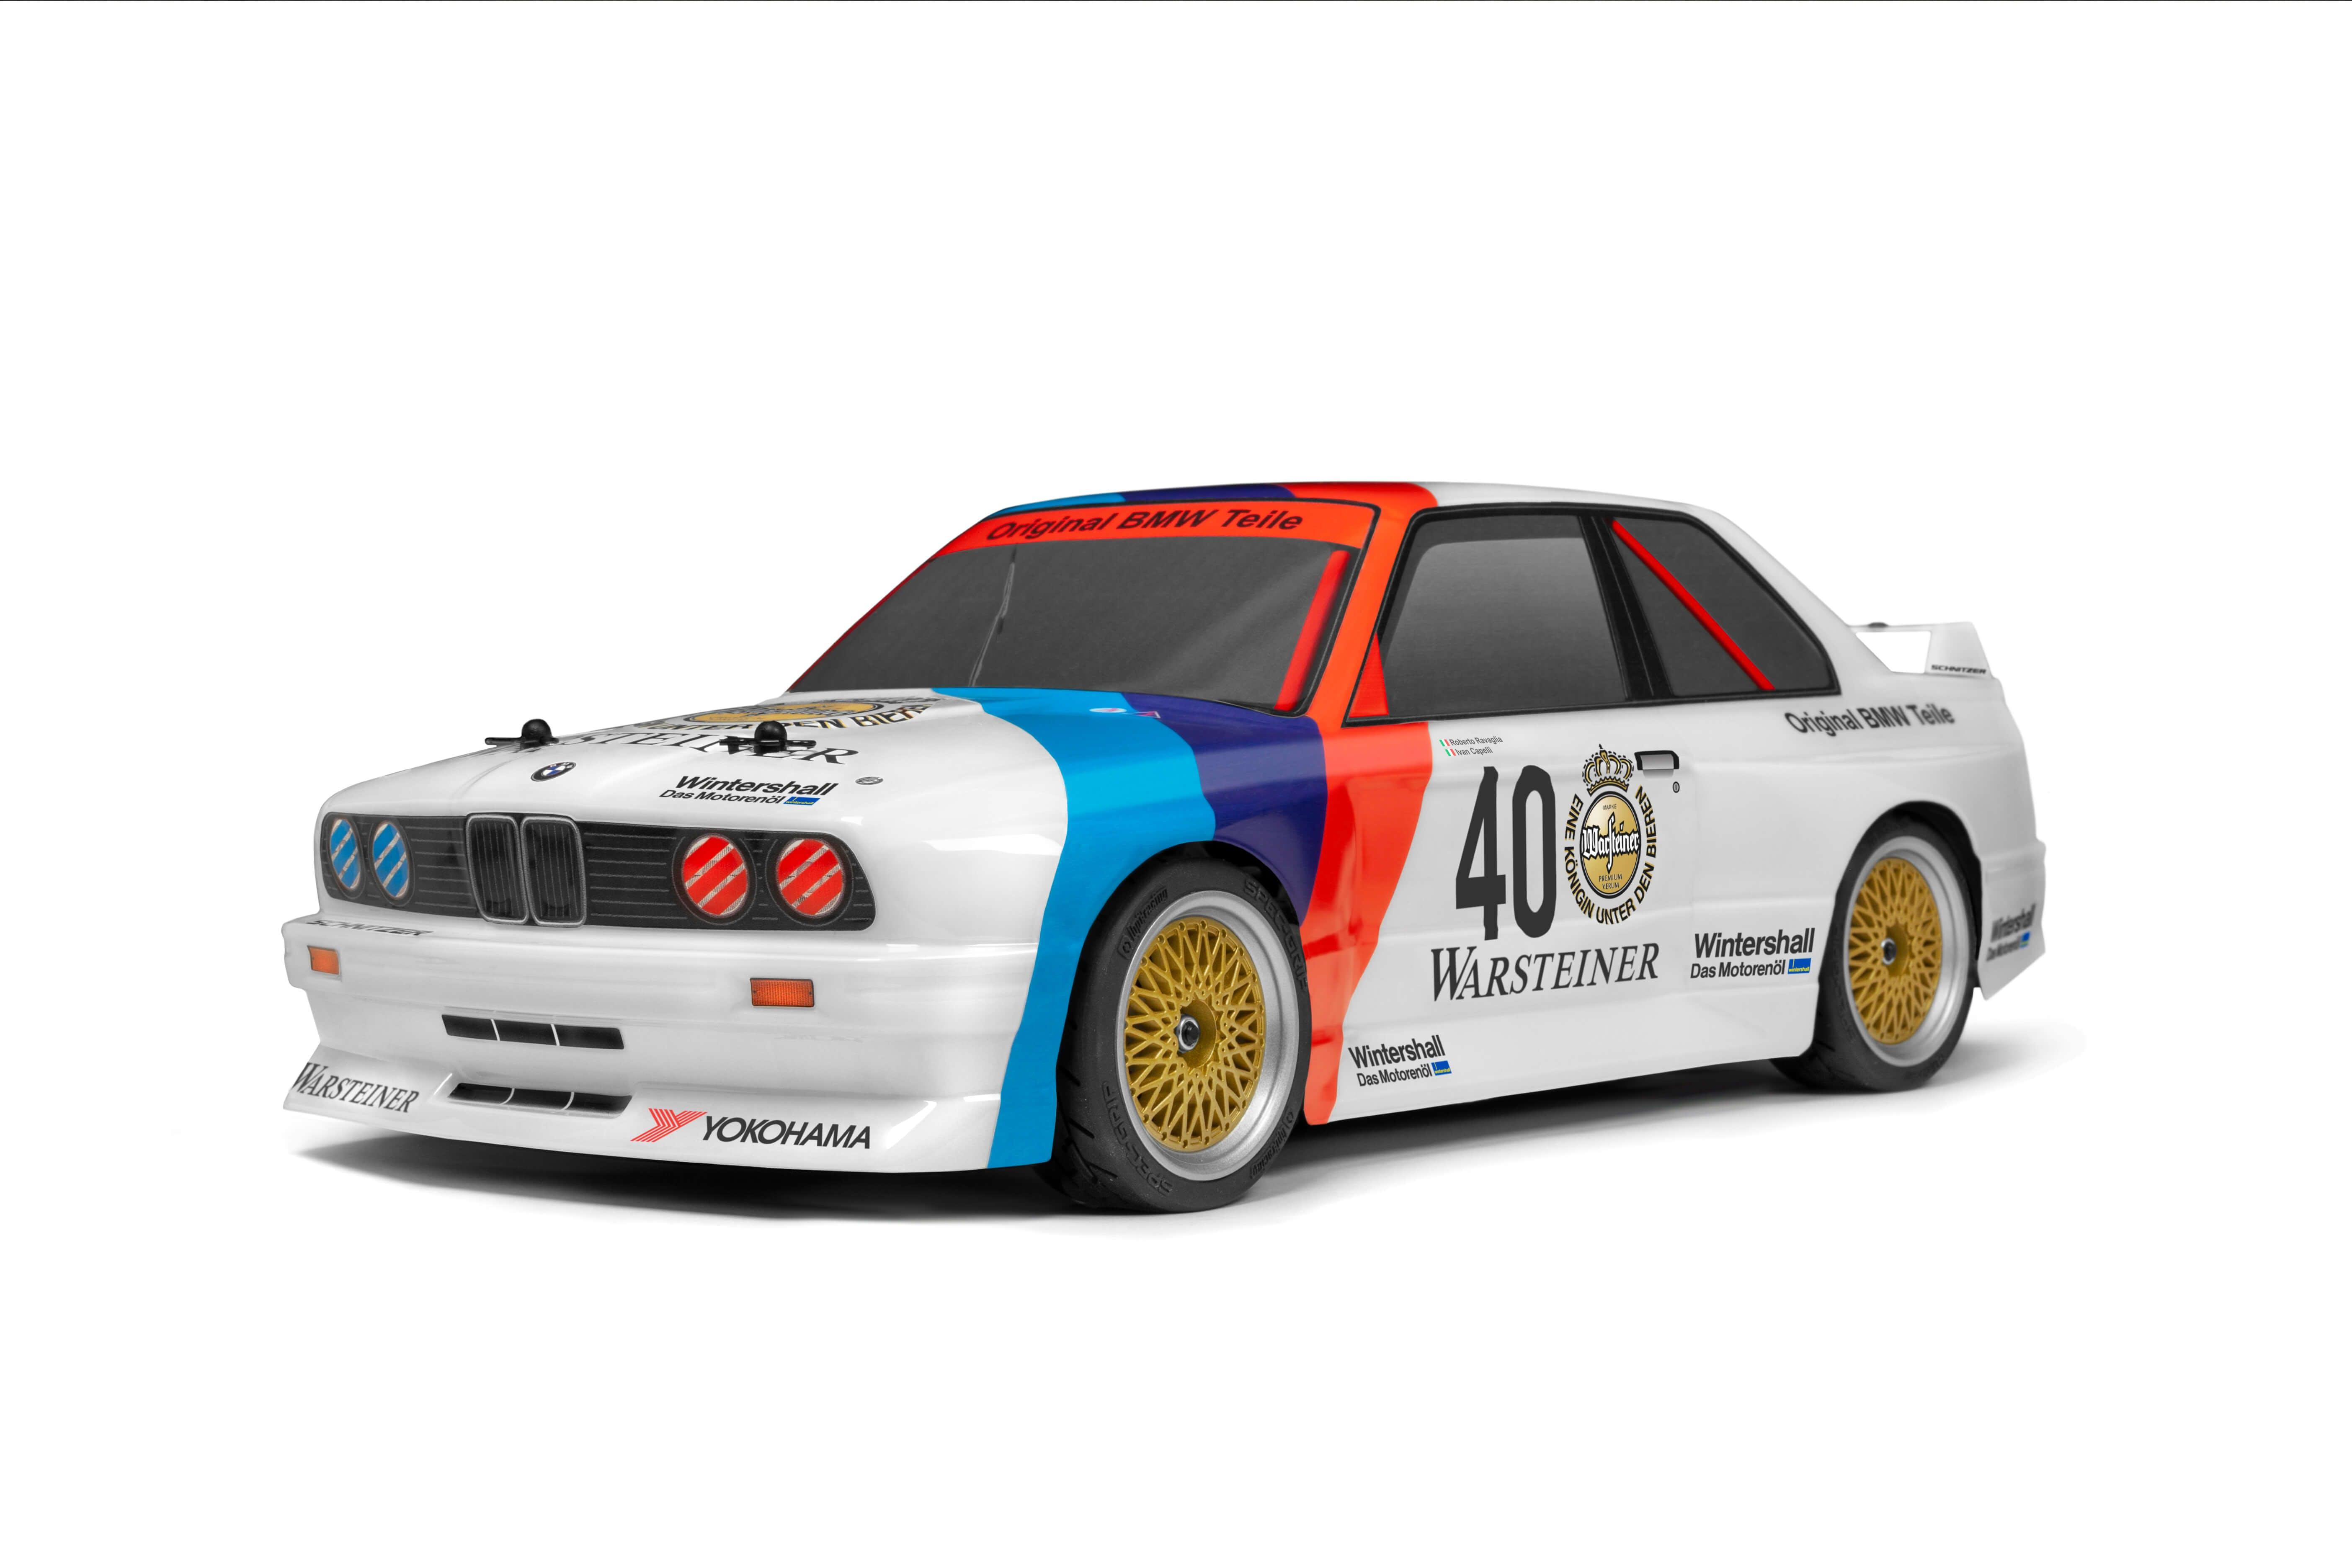 Bmw M3 Rc: Sleek and Stylish Design: Discover the BMW M3 RC's Impressive Features